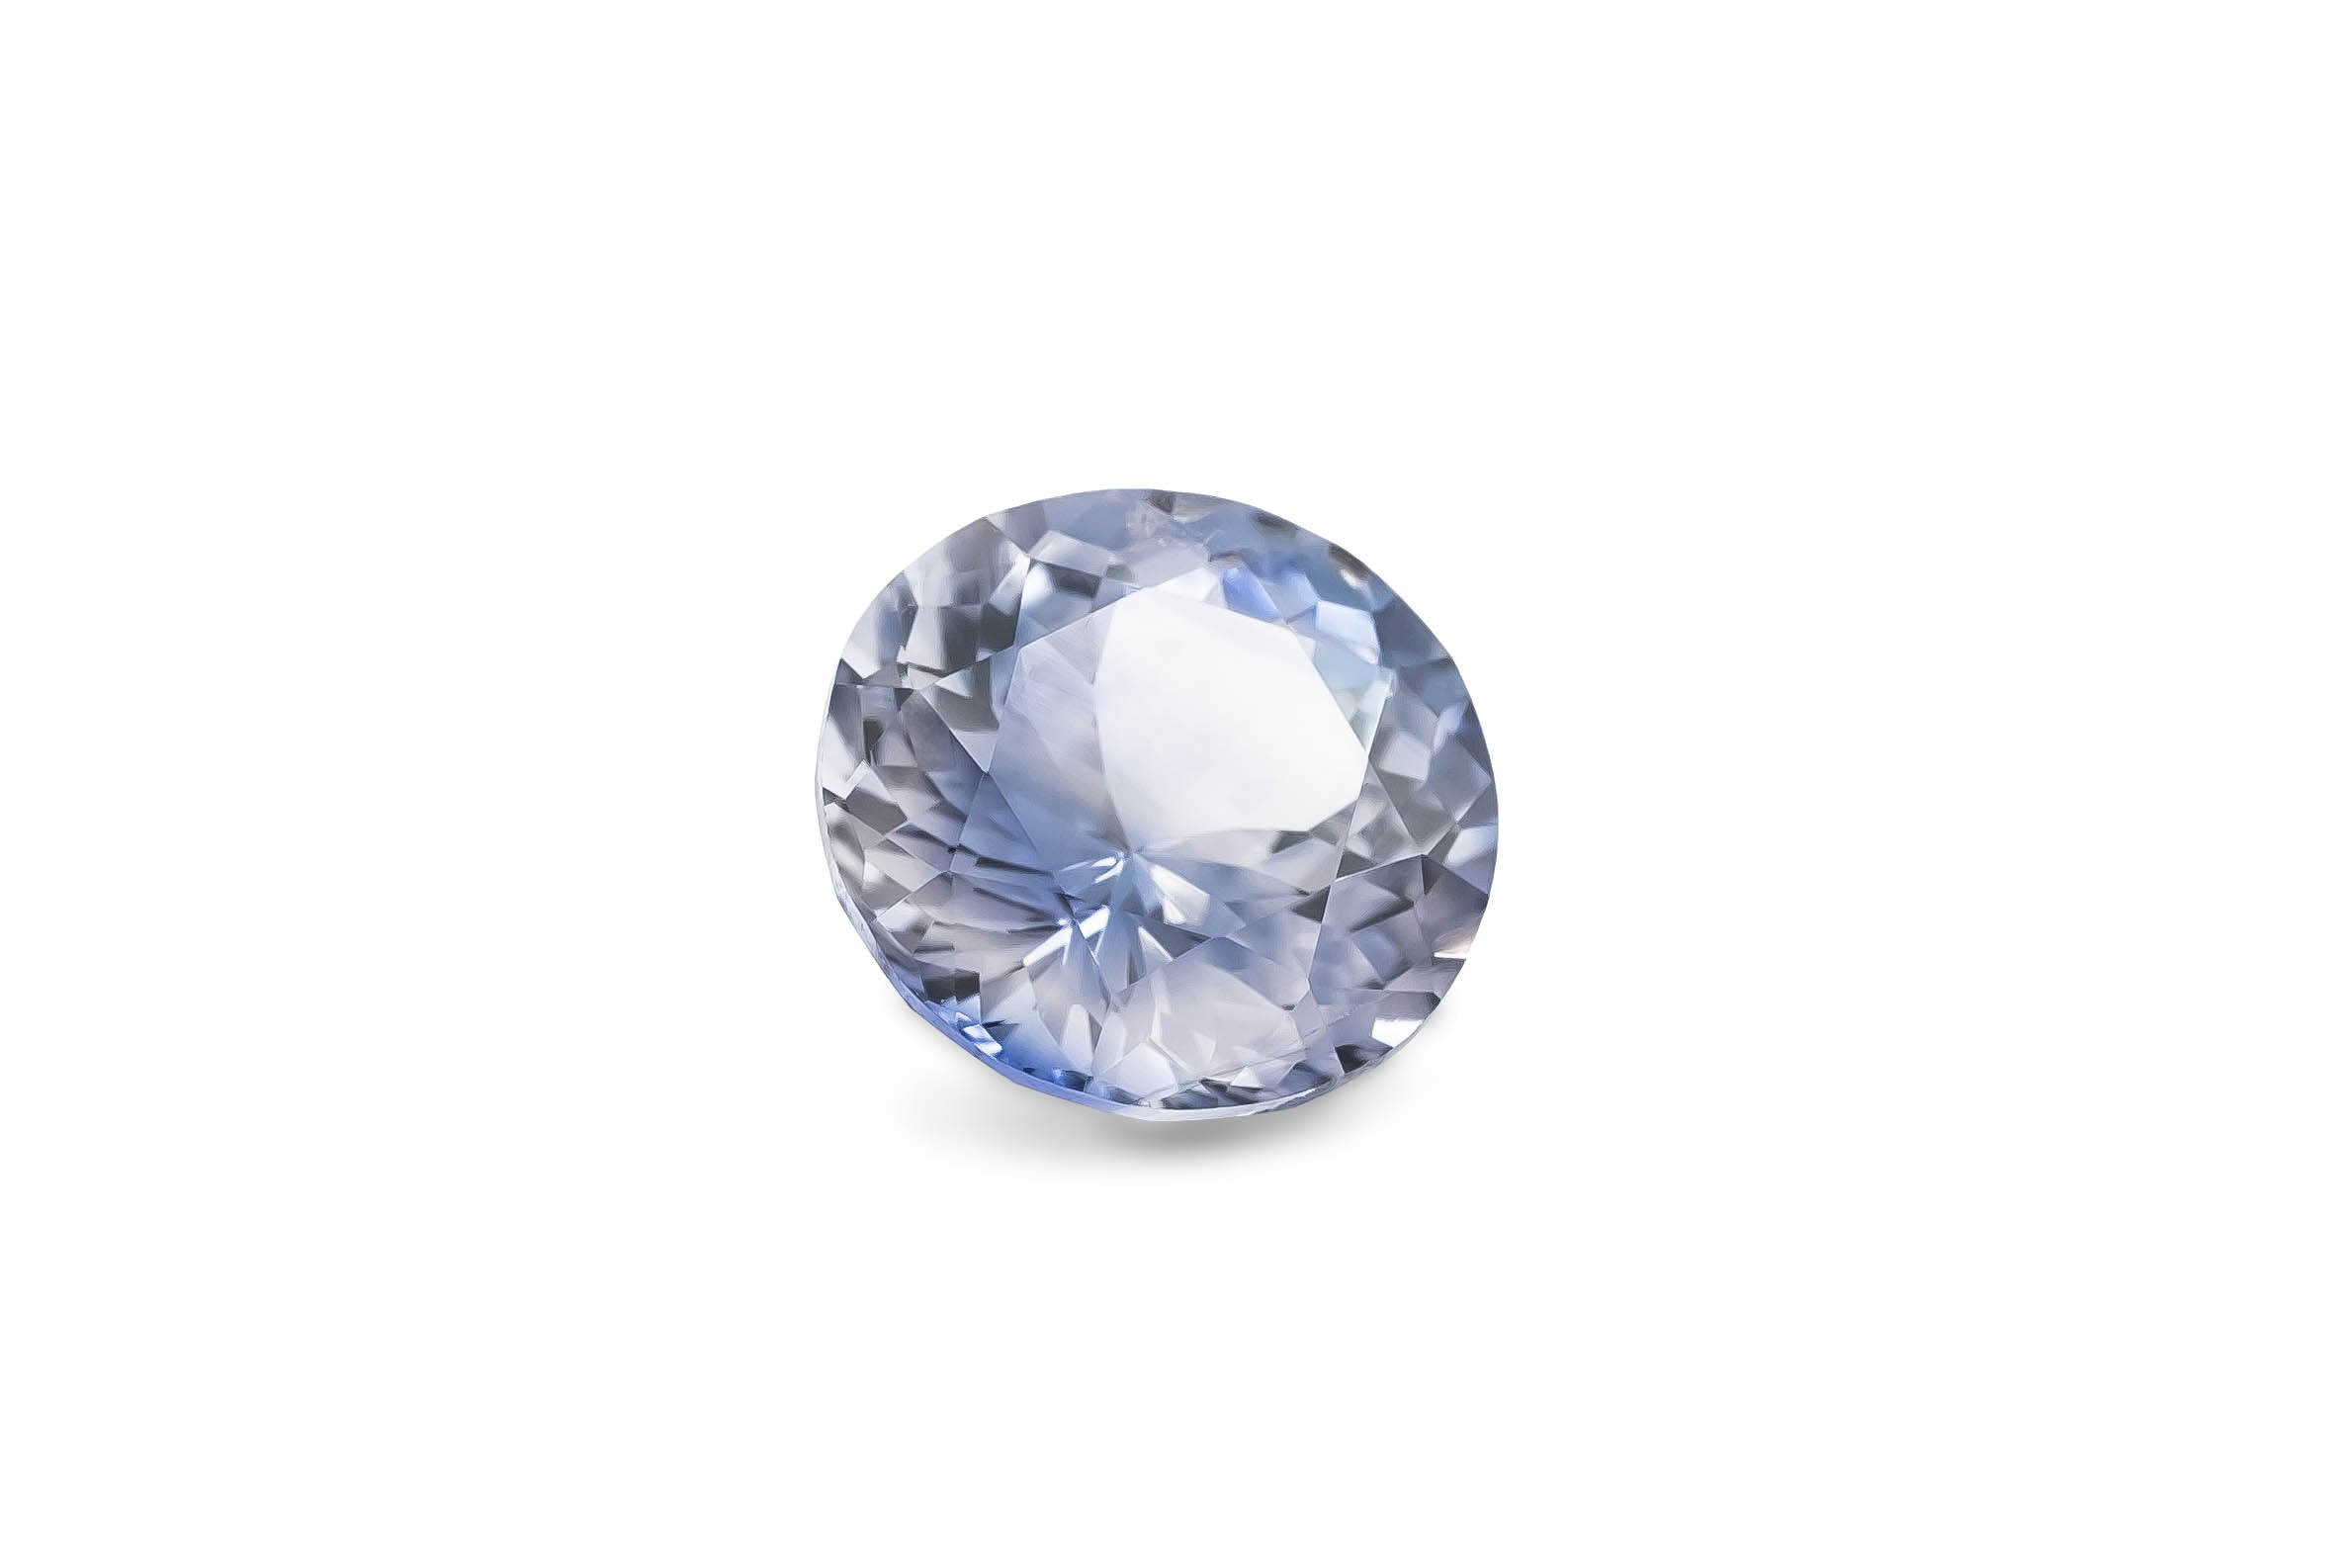 A unique round brilliant cut white and blue Ceylon sapphire gemstone is displayed on a white background.